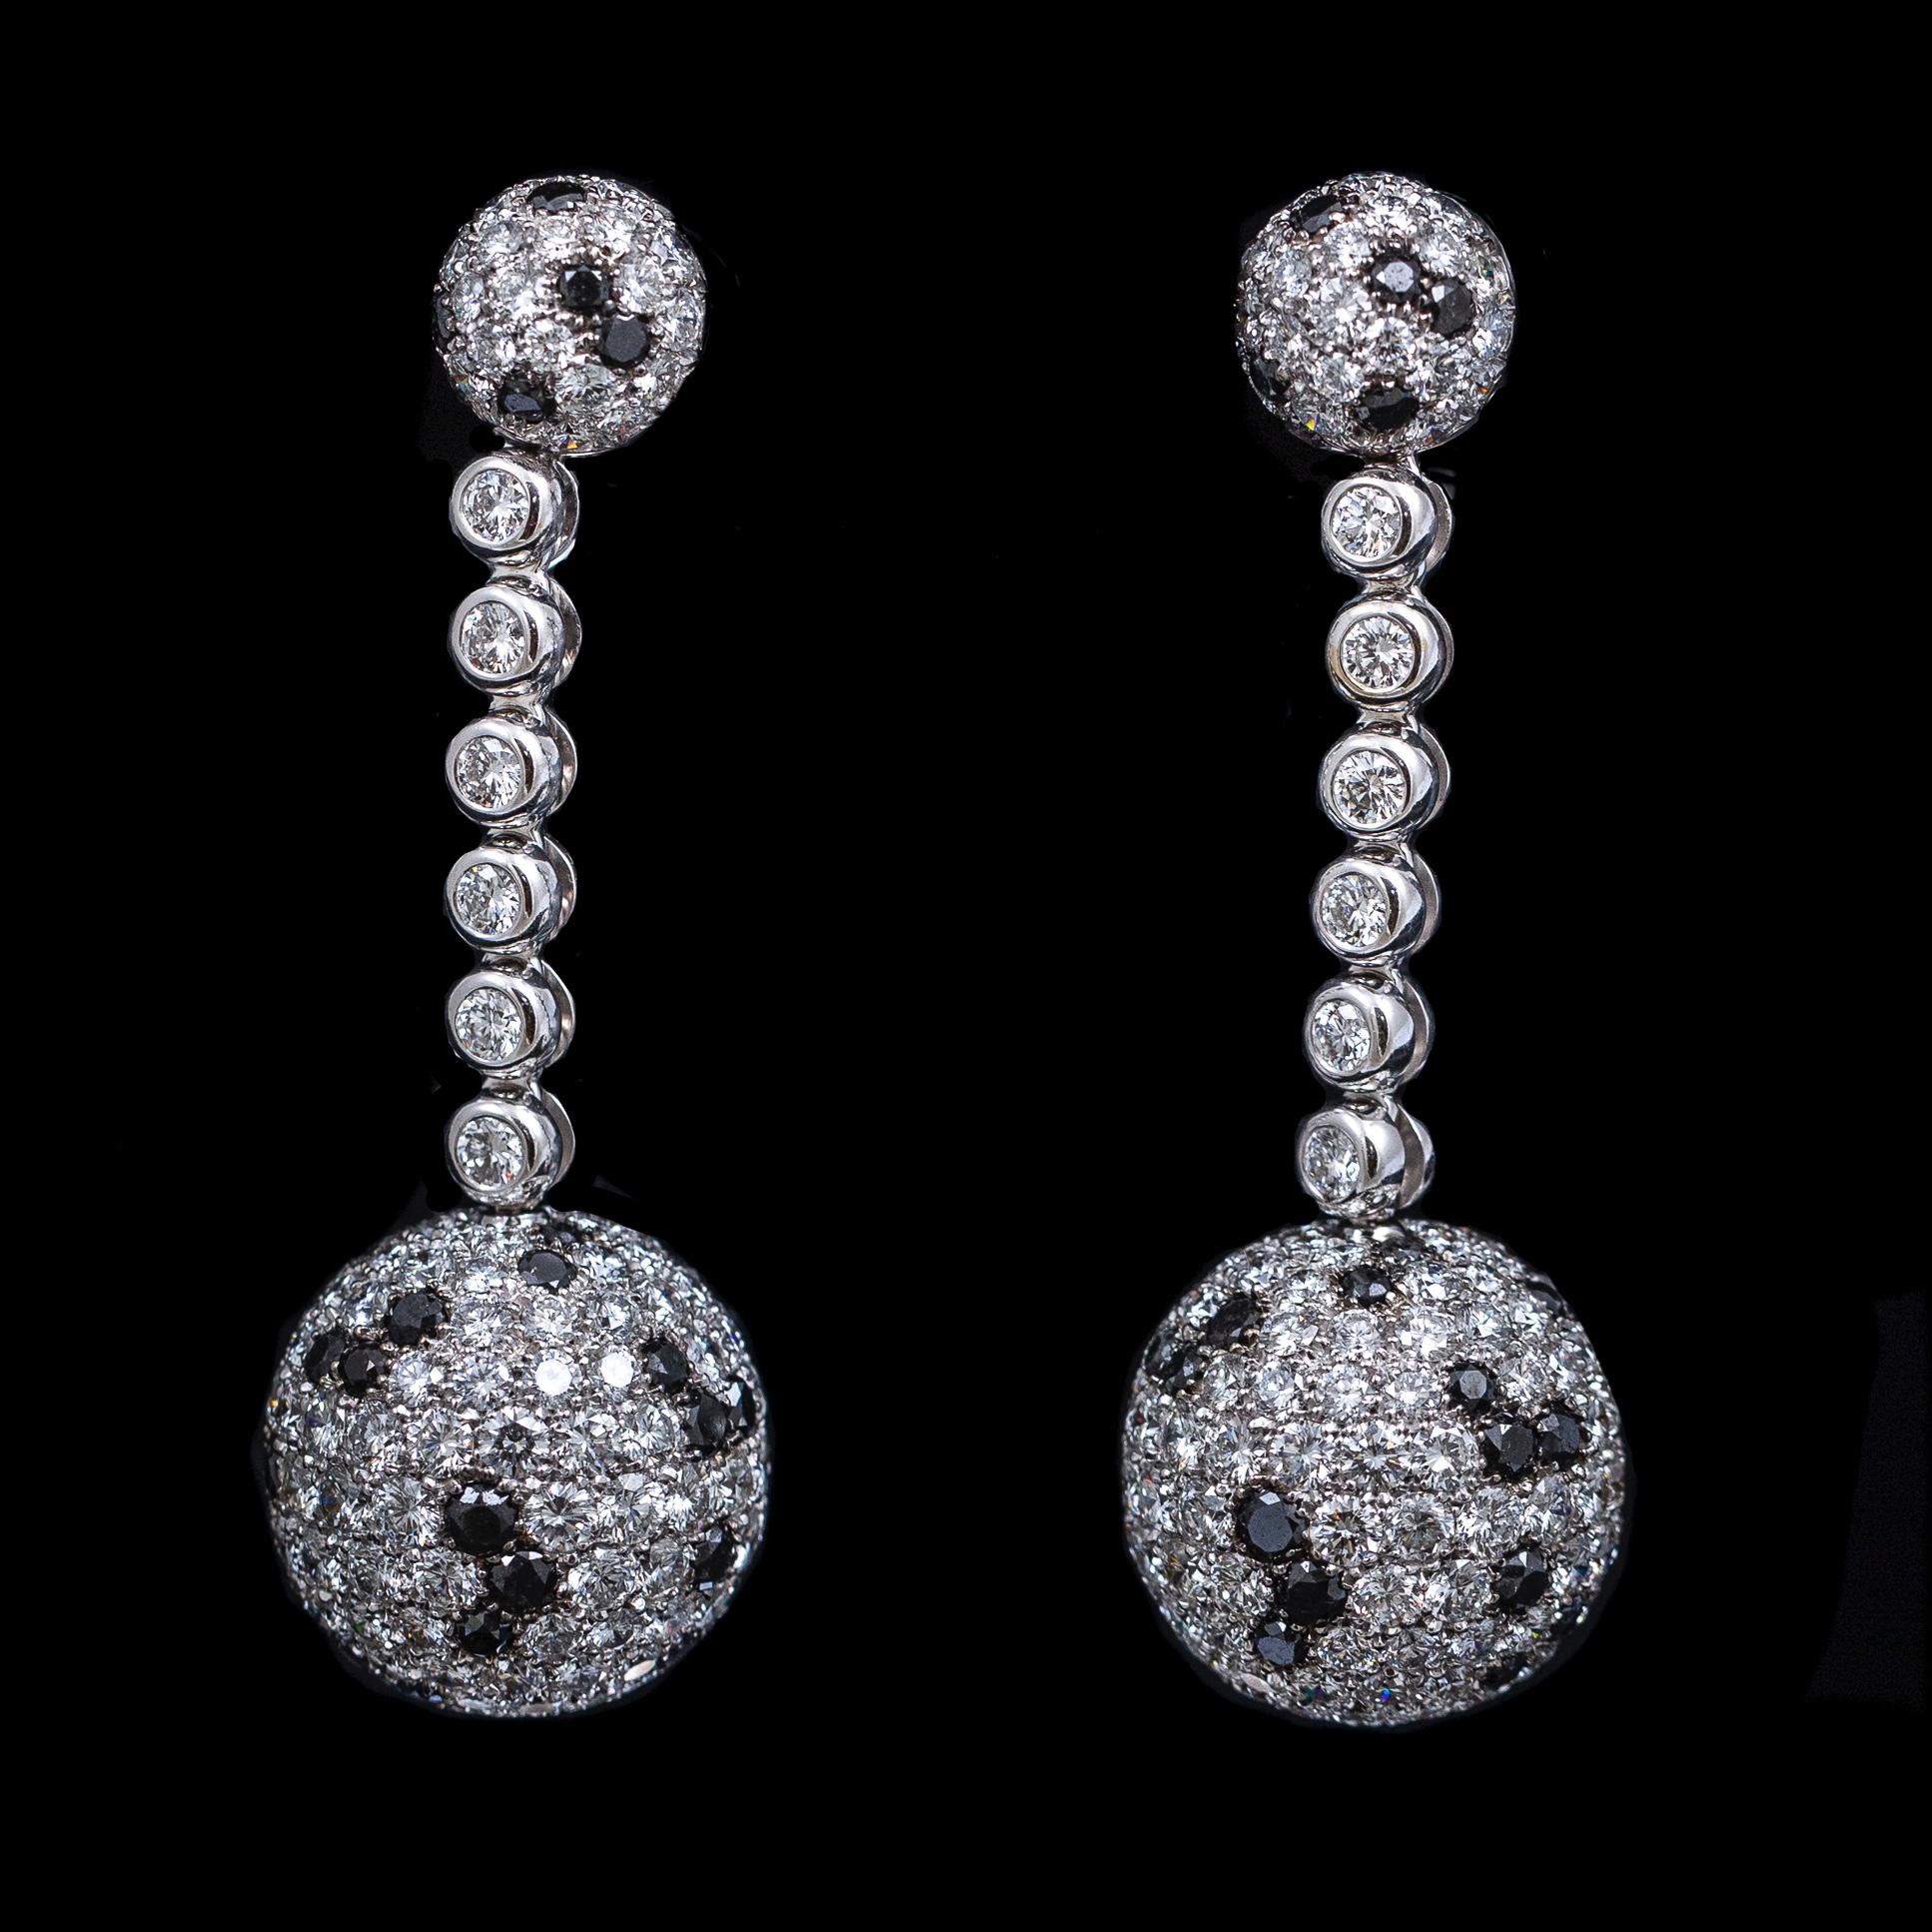 de GRISOGONO Boule round brilliant-cut colorless and black diamond ball dangle drop earrings in 18kt white gold, circa 2000. From the brand’s “Boule” collection and resembling a dalmatian’s black-and-white spotted pattern, each earring is designed